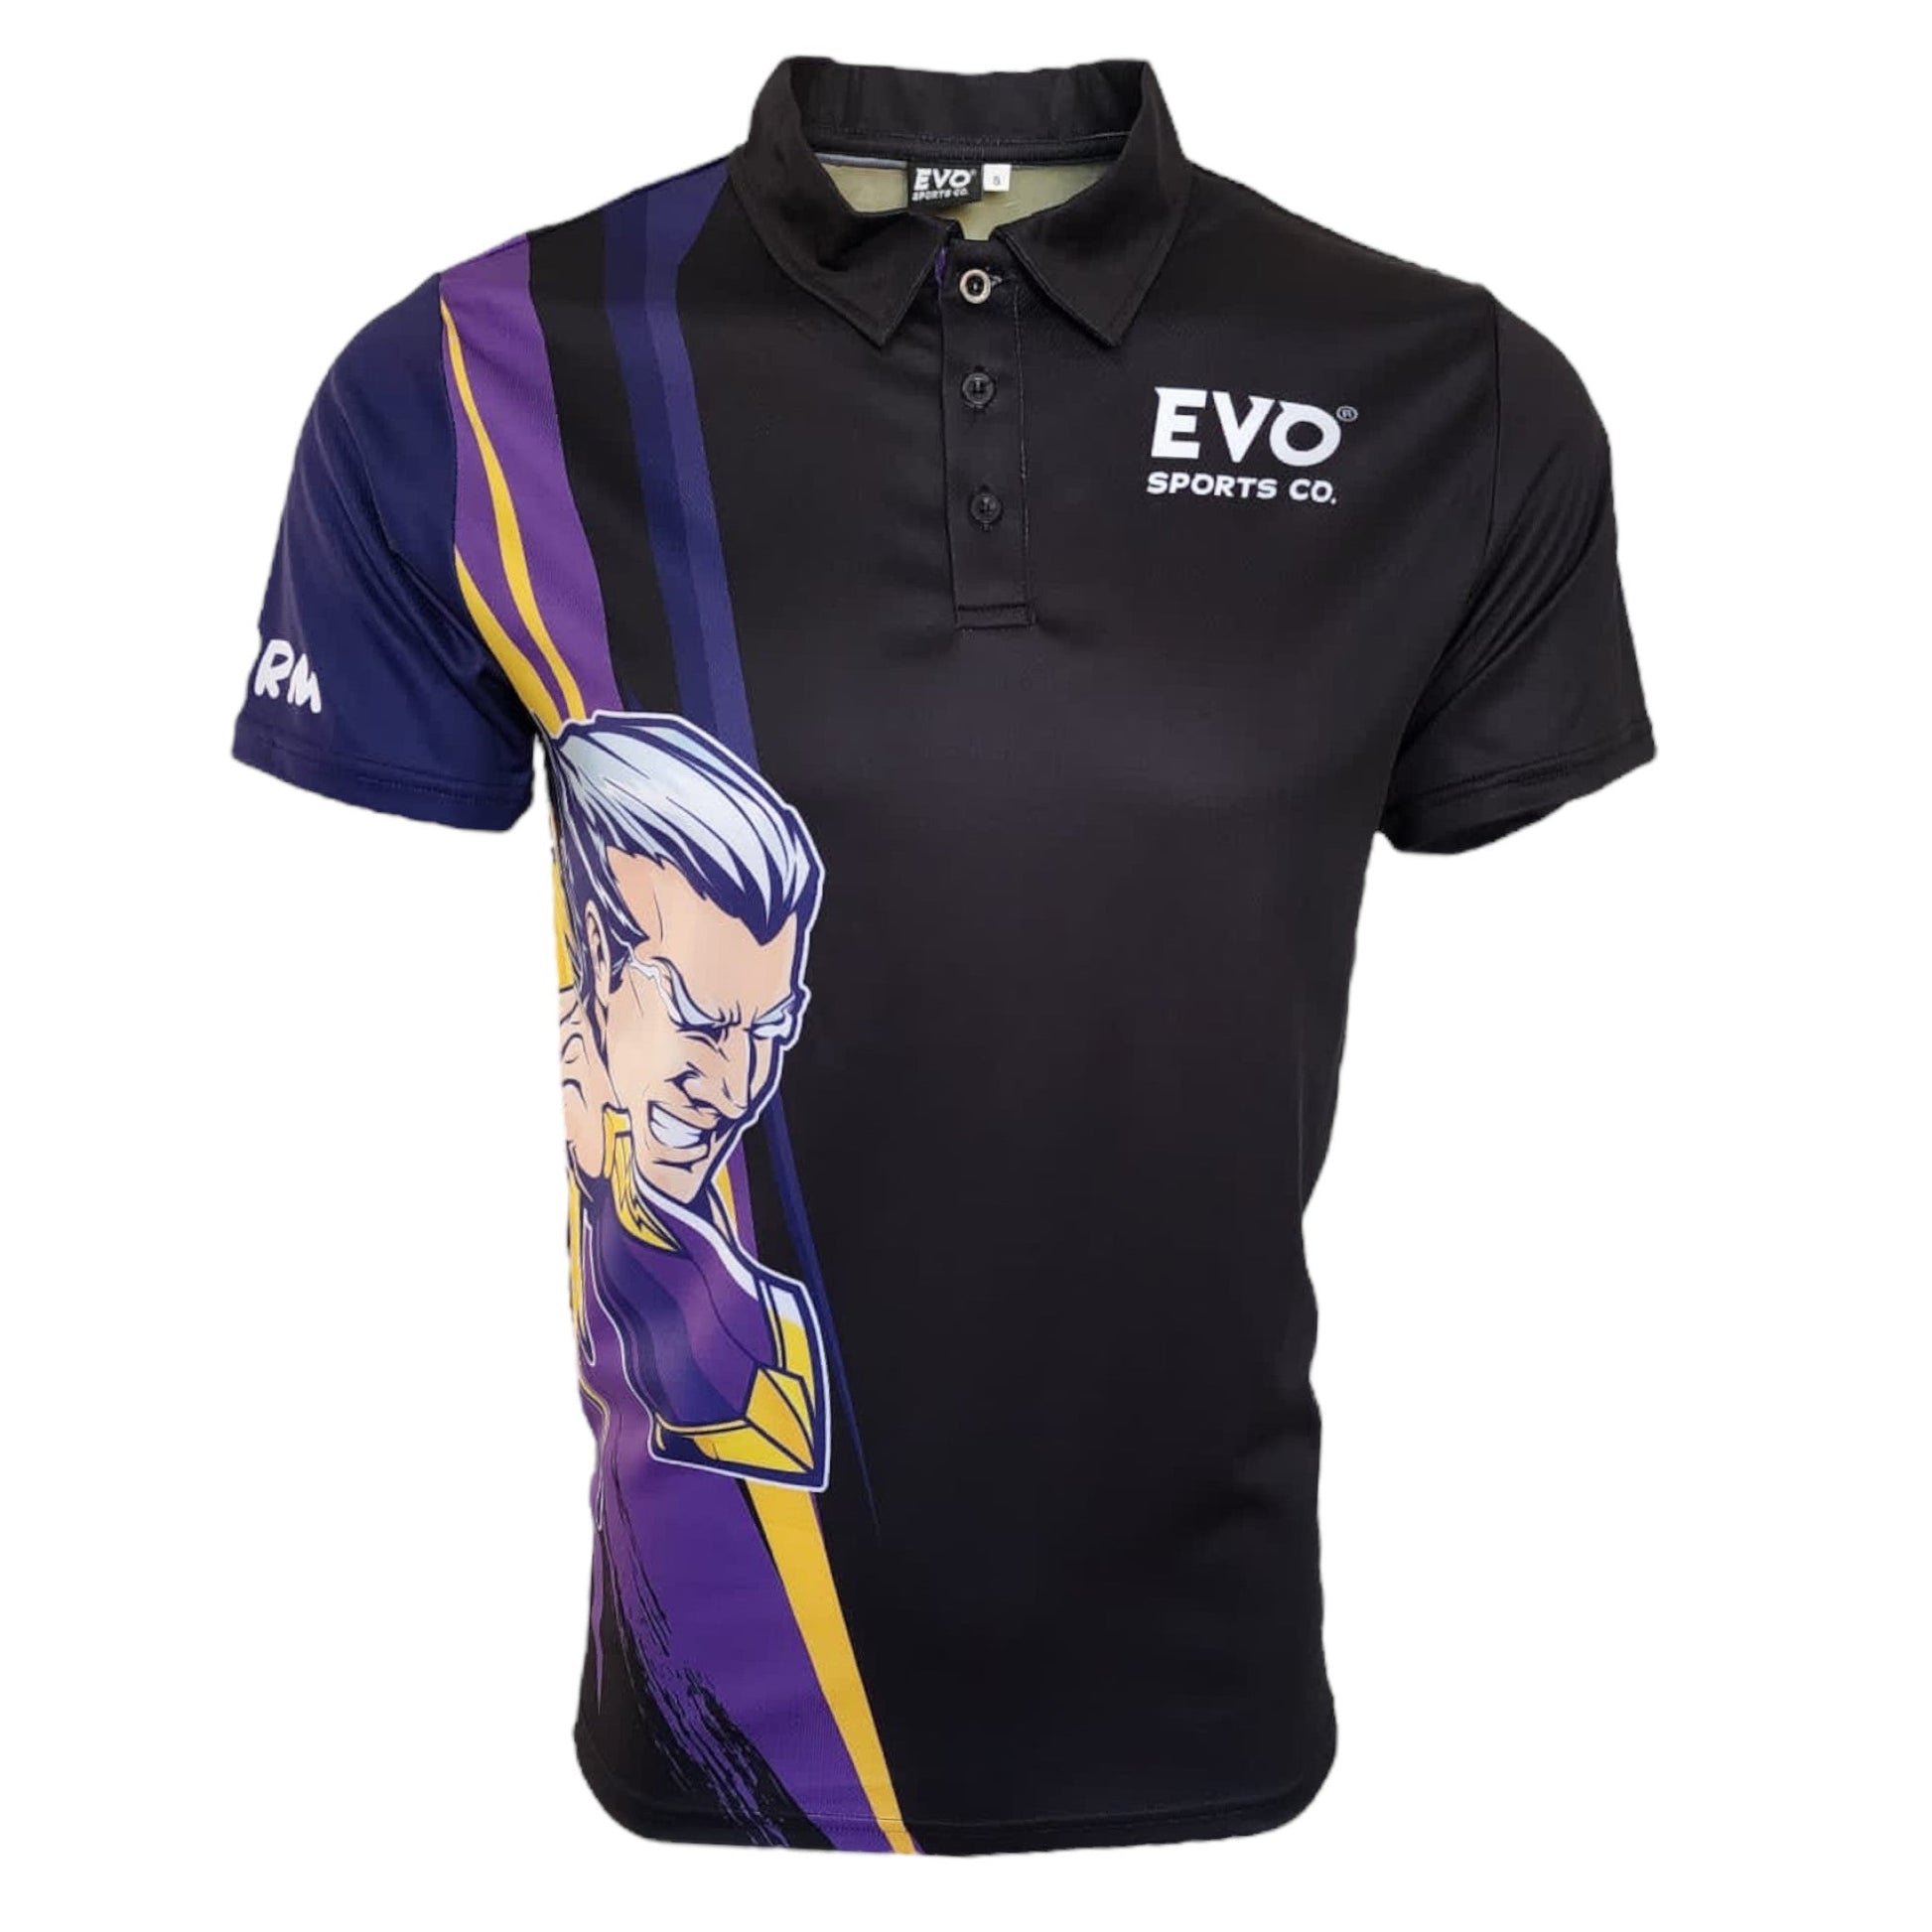 Unisex Adults Storm Shirt - Quick Dry Polo - Evo Sports Co